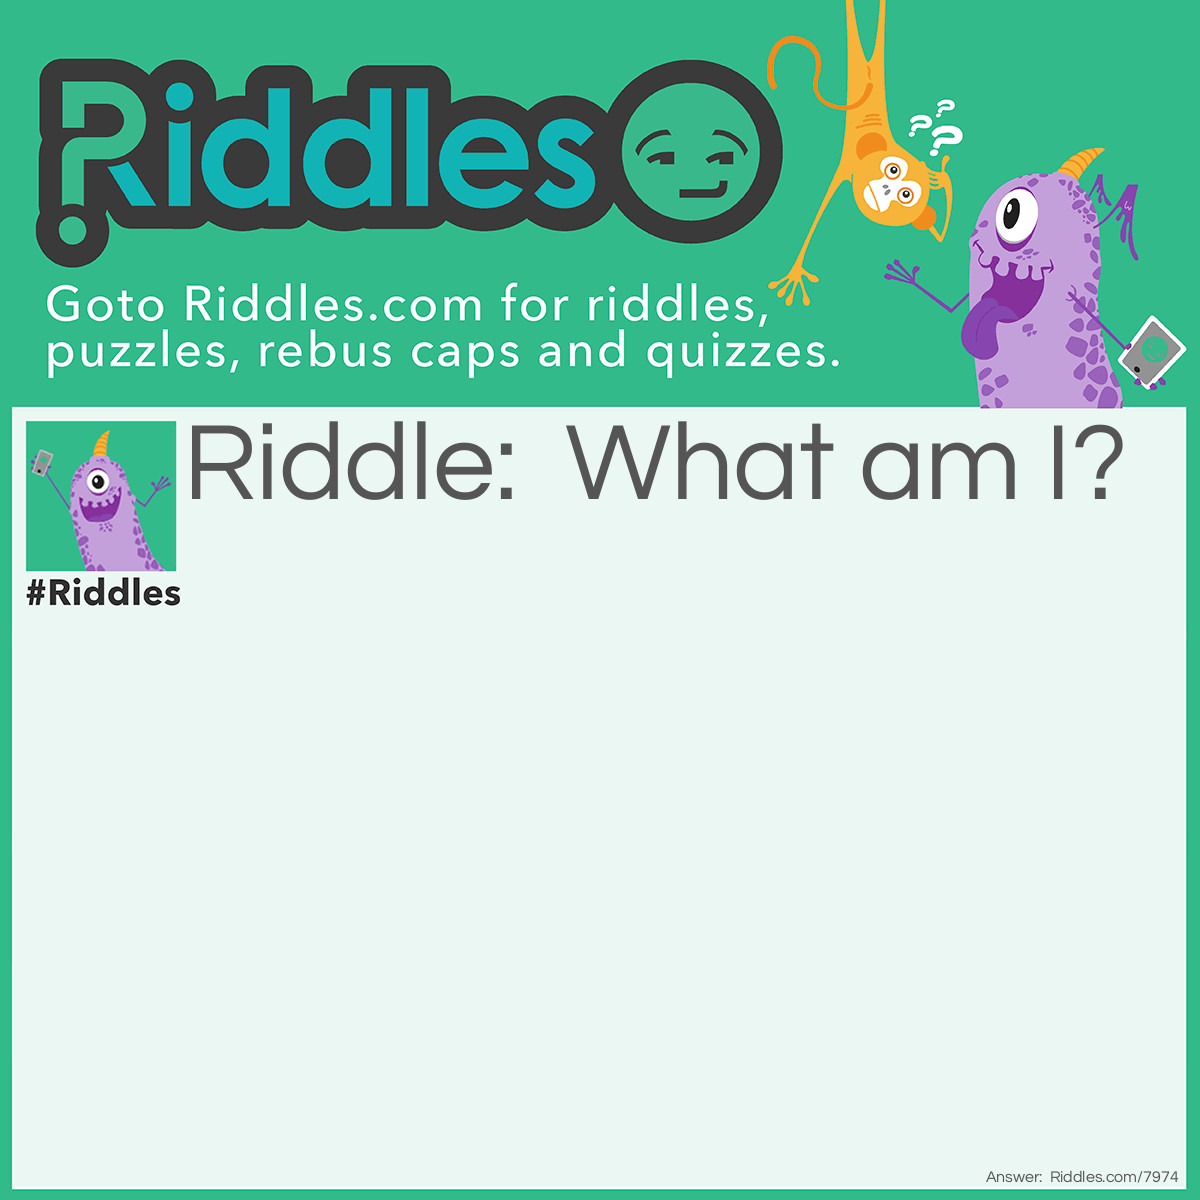 Riddle: What am I? Answer: A riddle.